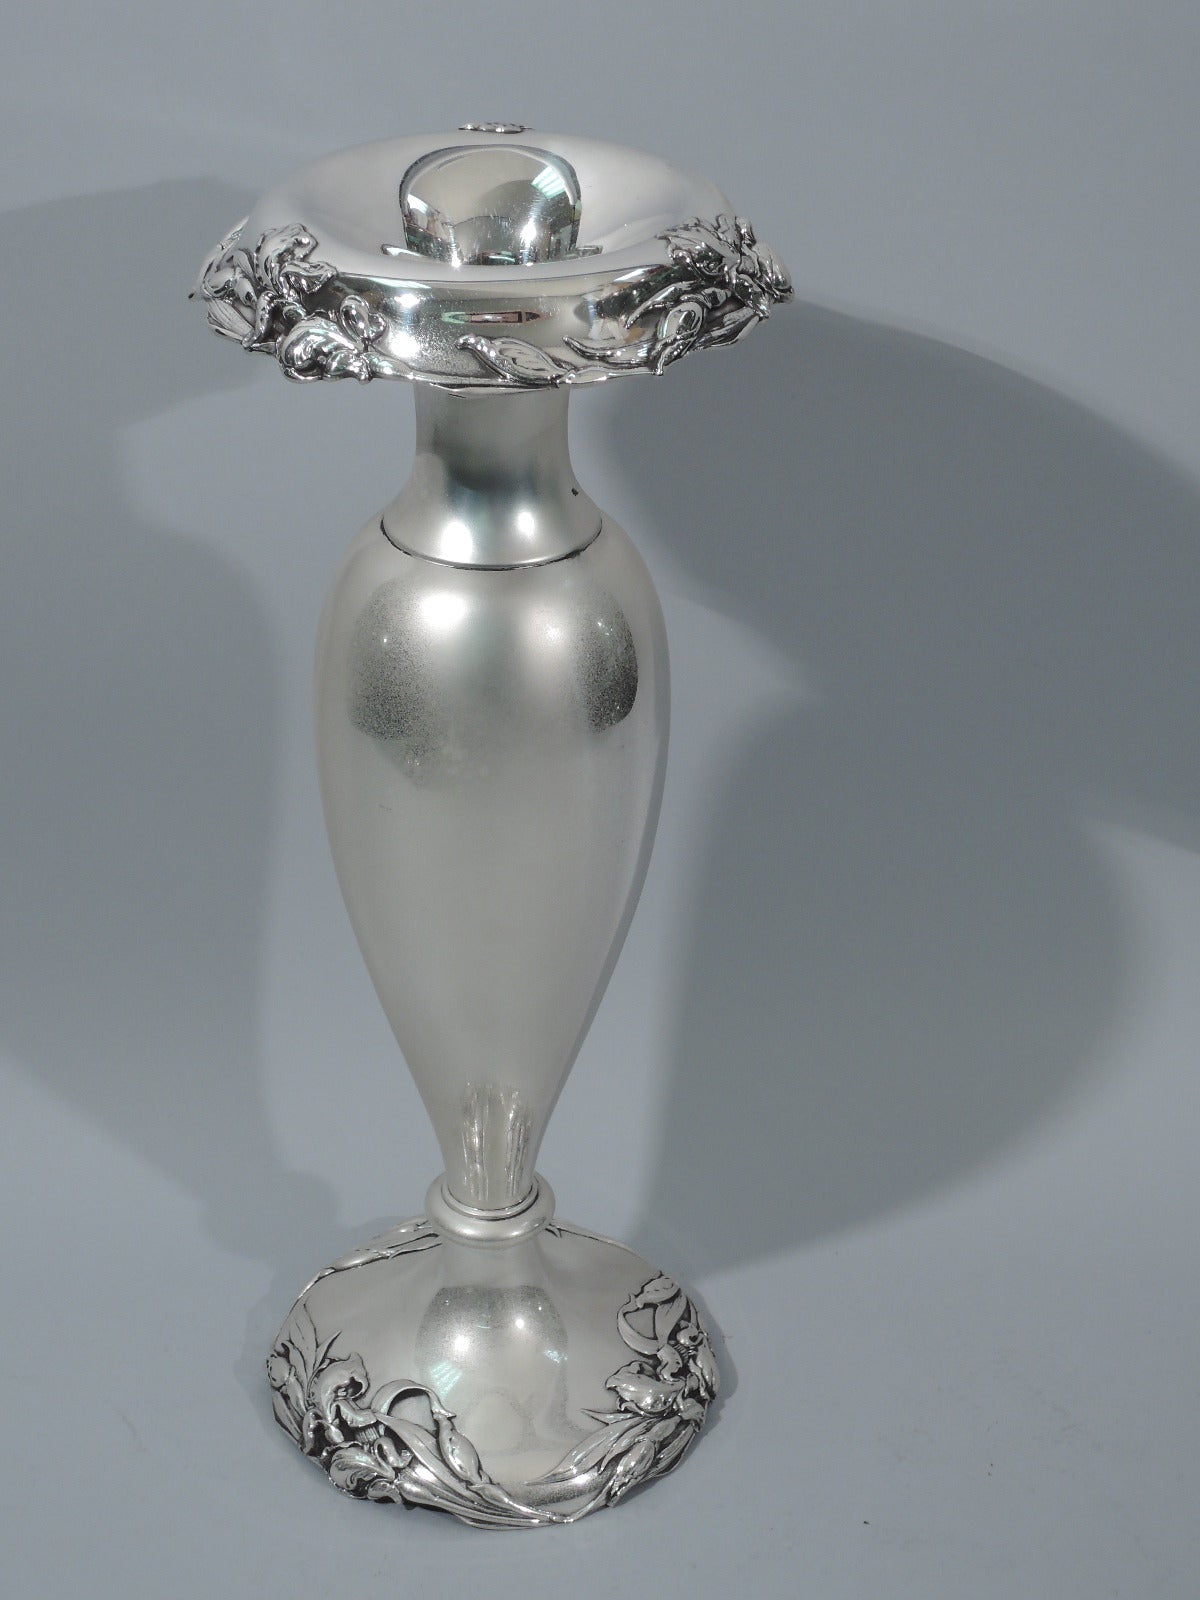 American Art Nouveau Sterling Silver Vase by Reed & Barton